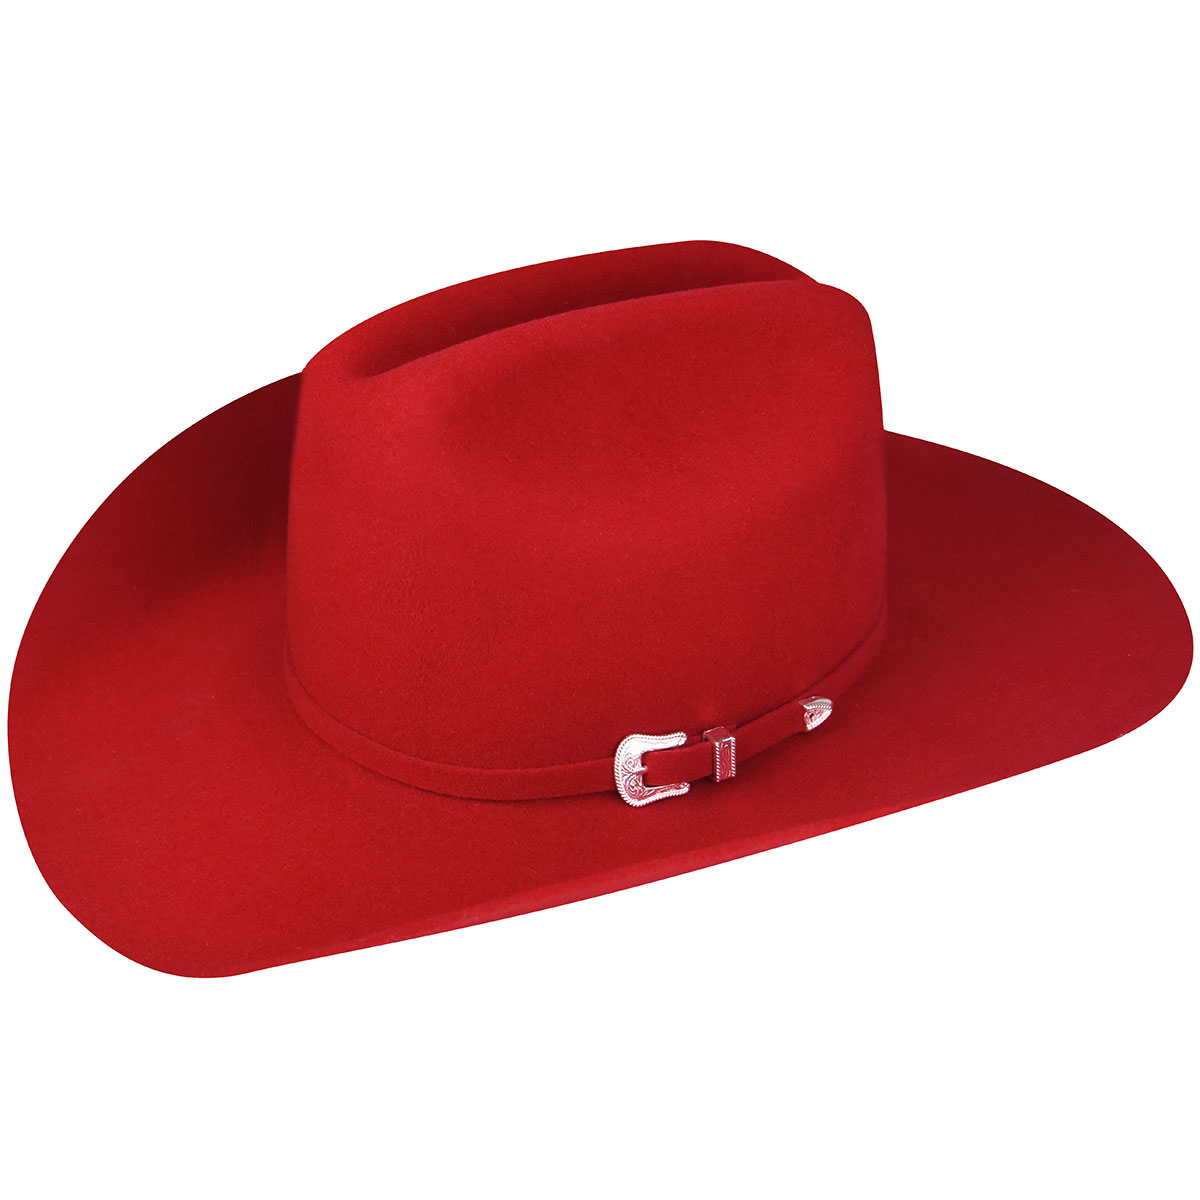 Hats - Red